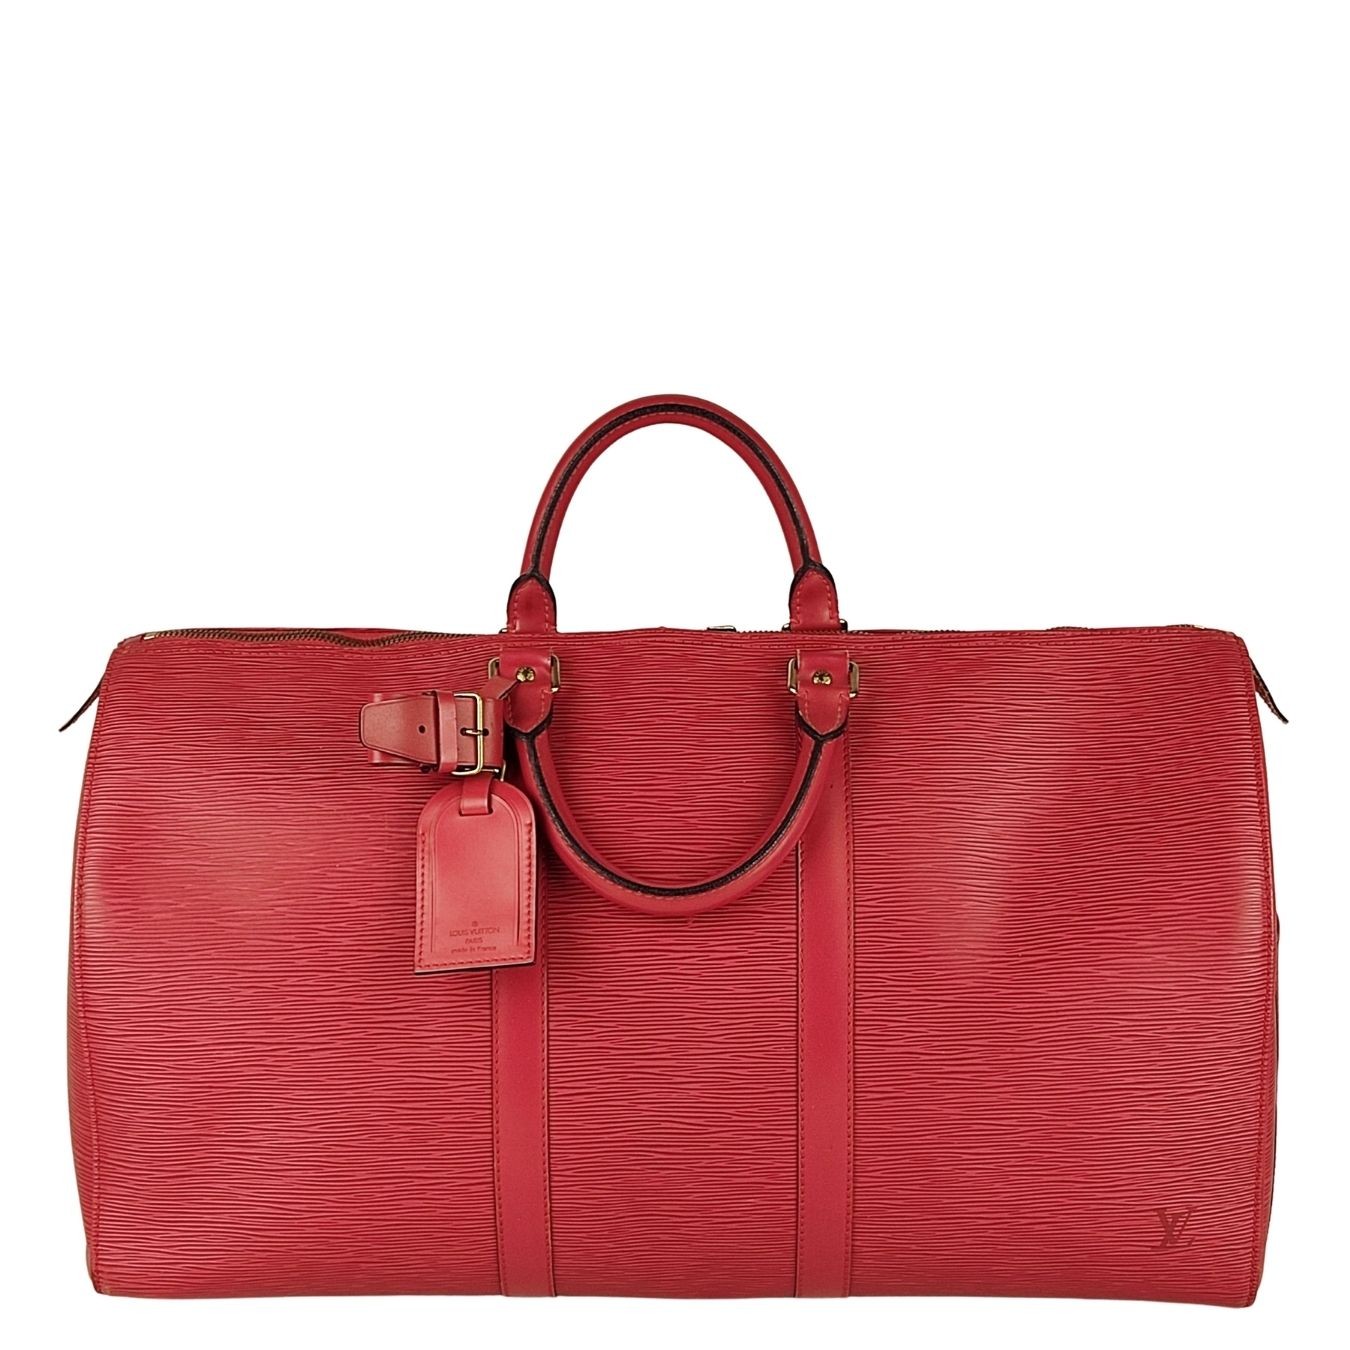 Sold at Auction: LOUIS VUITTON 'KEEPALL 45' EPI LEATHER TRAVEL BAG